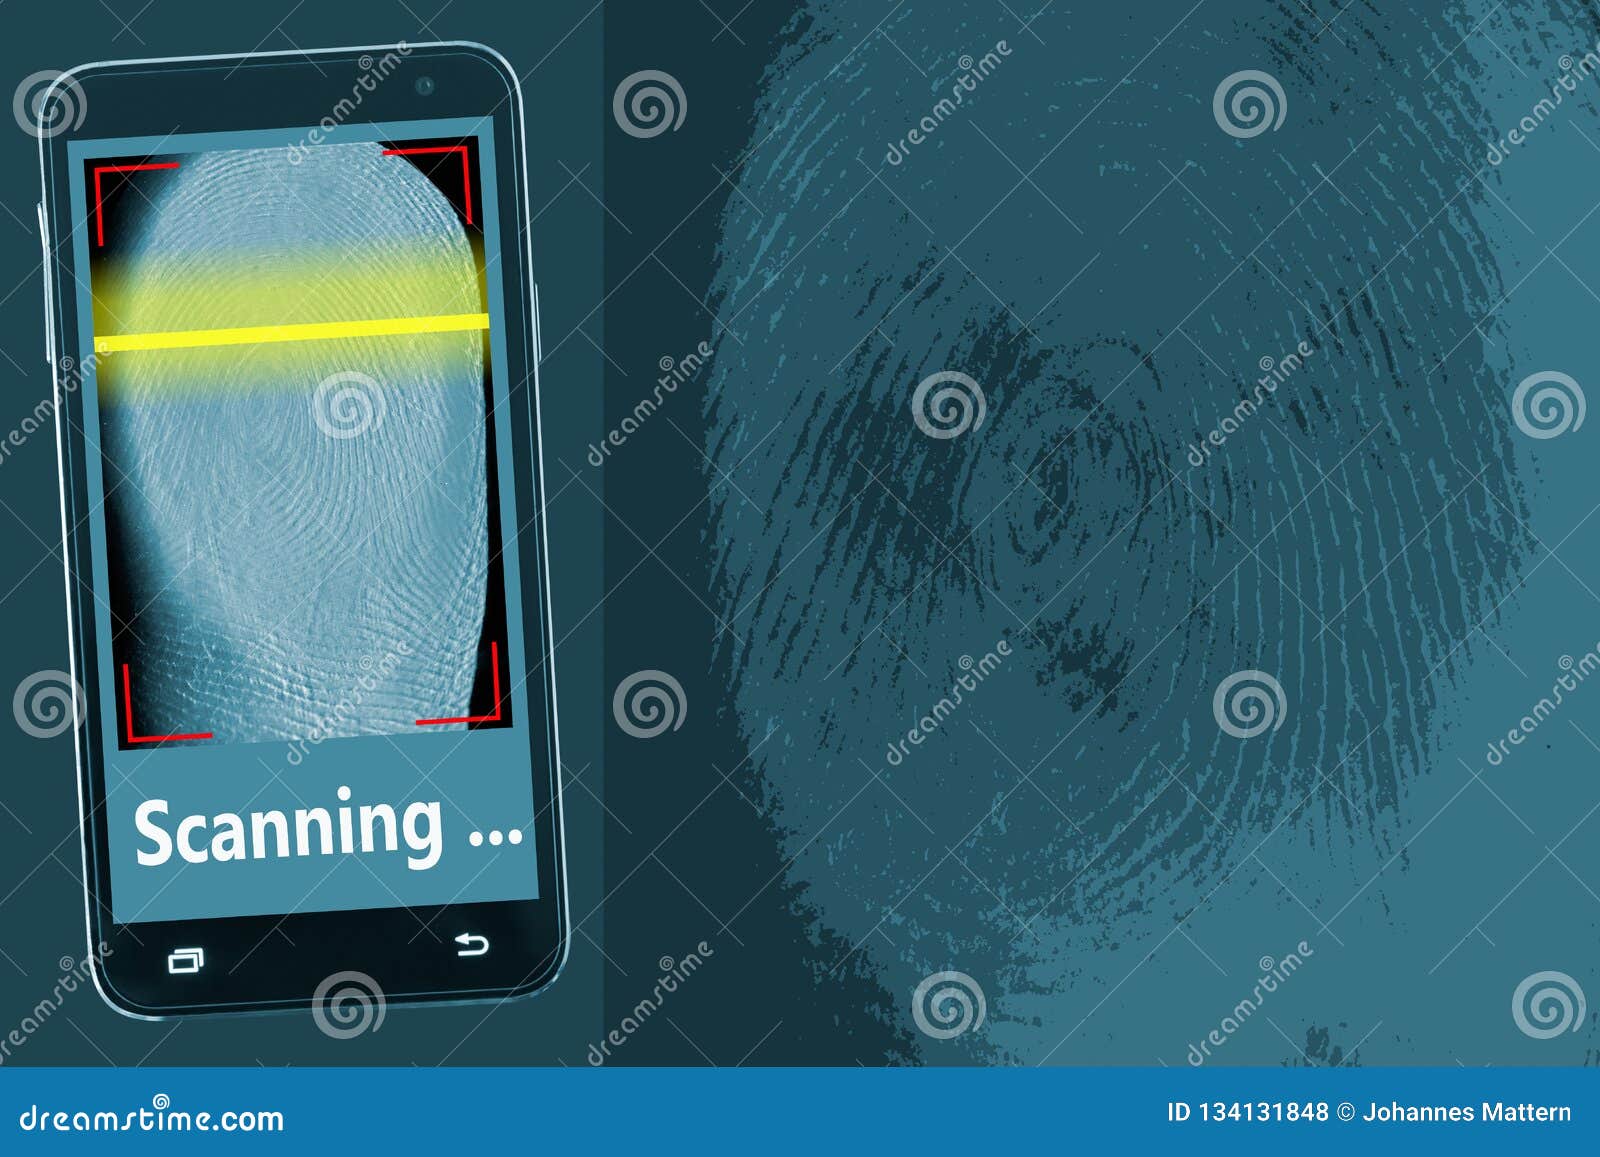 Mobile Security Application Stock Photo - Image of screen ...